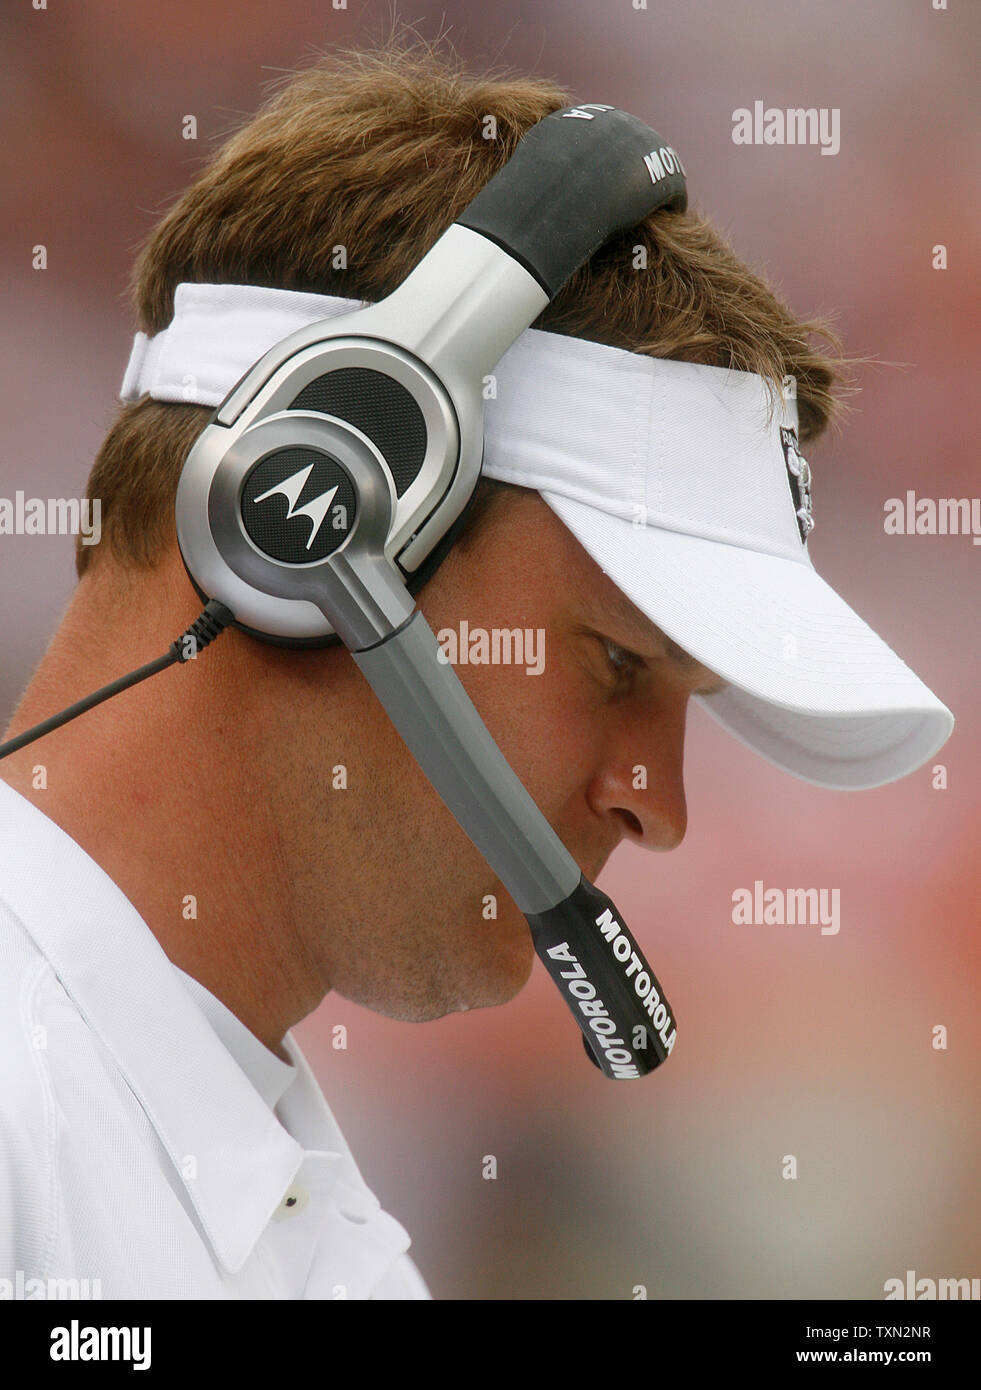 31 year old Oakland Raiders rookie head coach Lane Kiffin studies his play chart against the Denver Broncos at Invesco Field at Mile High in Denver on September 16, 2007.   Denver beat Oakland 23-20 in overtime.  (UPI Photo/Gary C. Caskey) Stock Photo